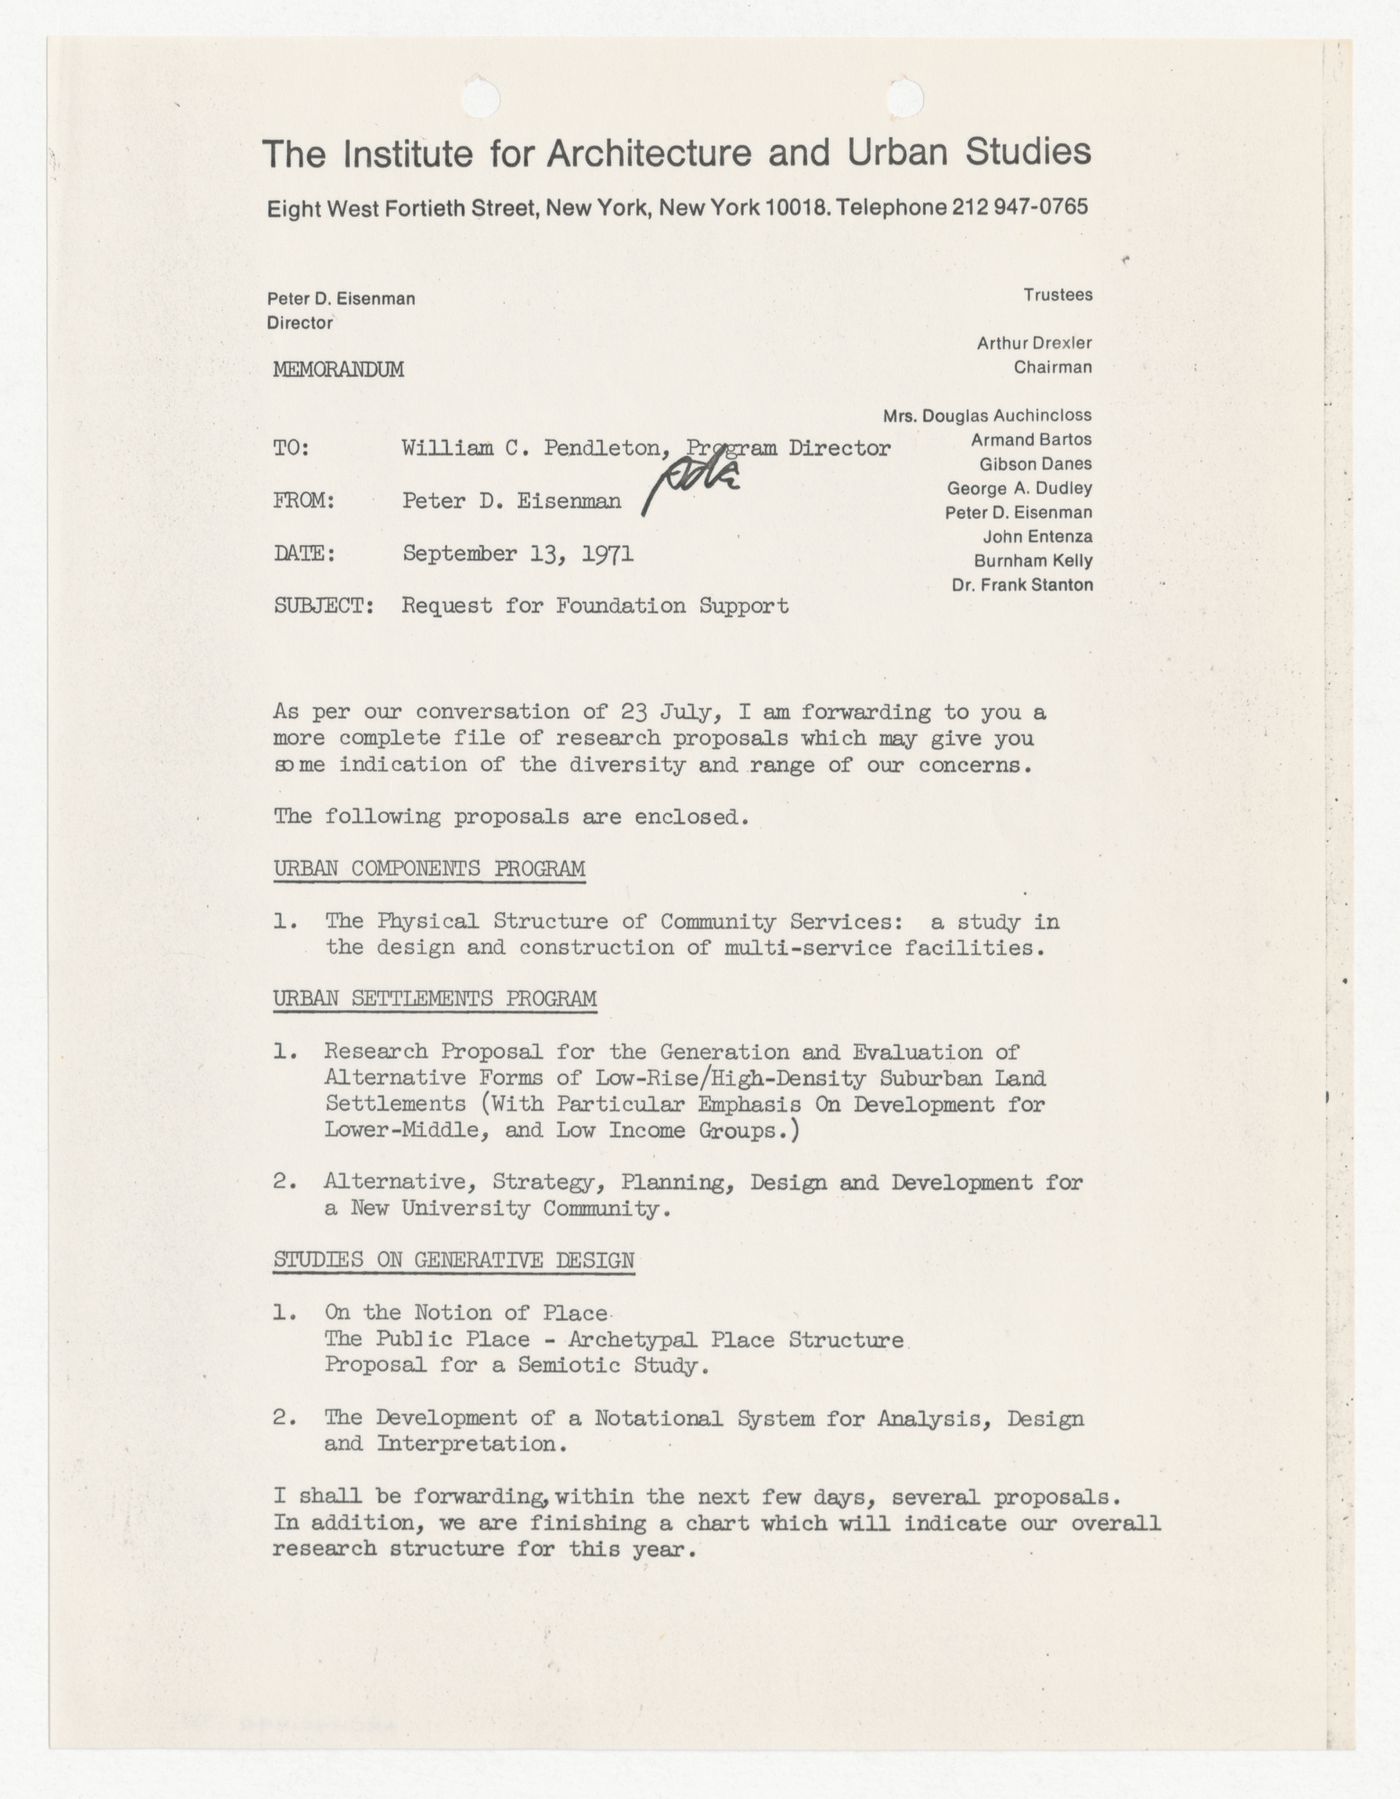 Letter from William C. Pendleton to Peter D. Eisenman with attached memorandum from Peter D. Eisenman